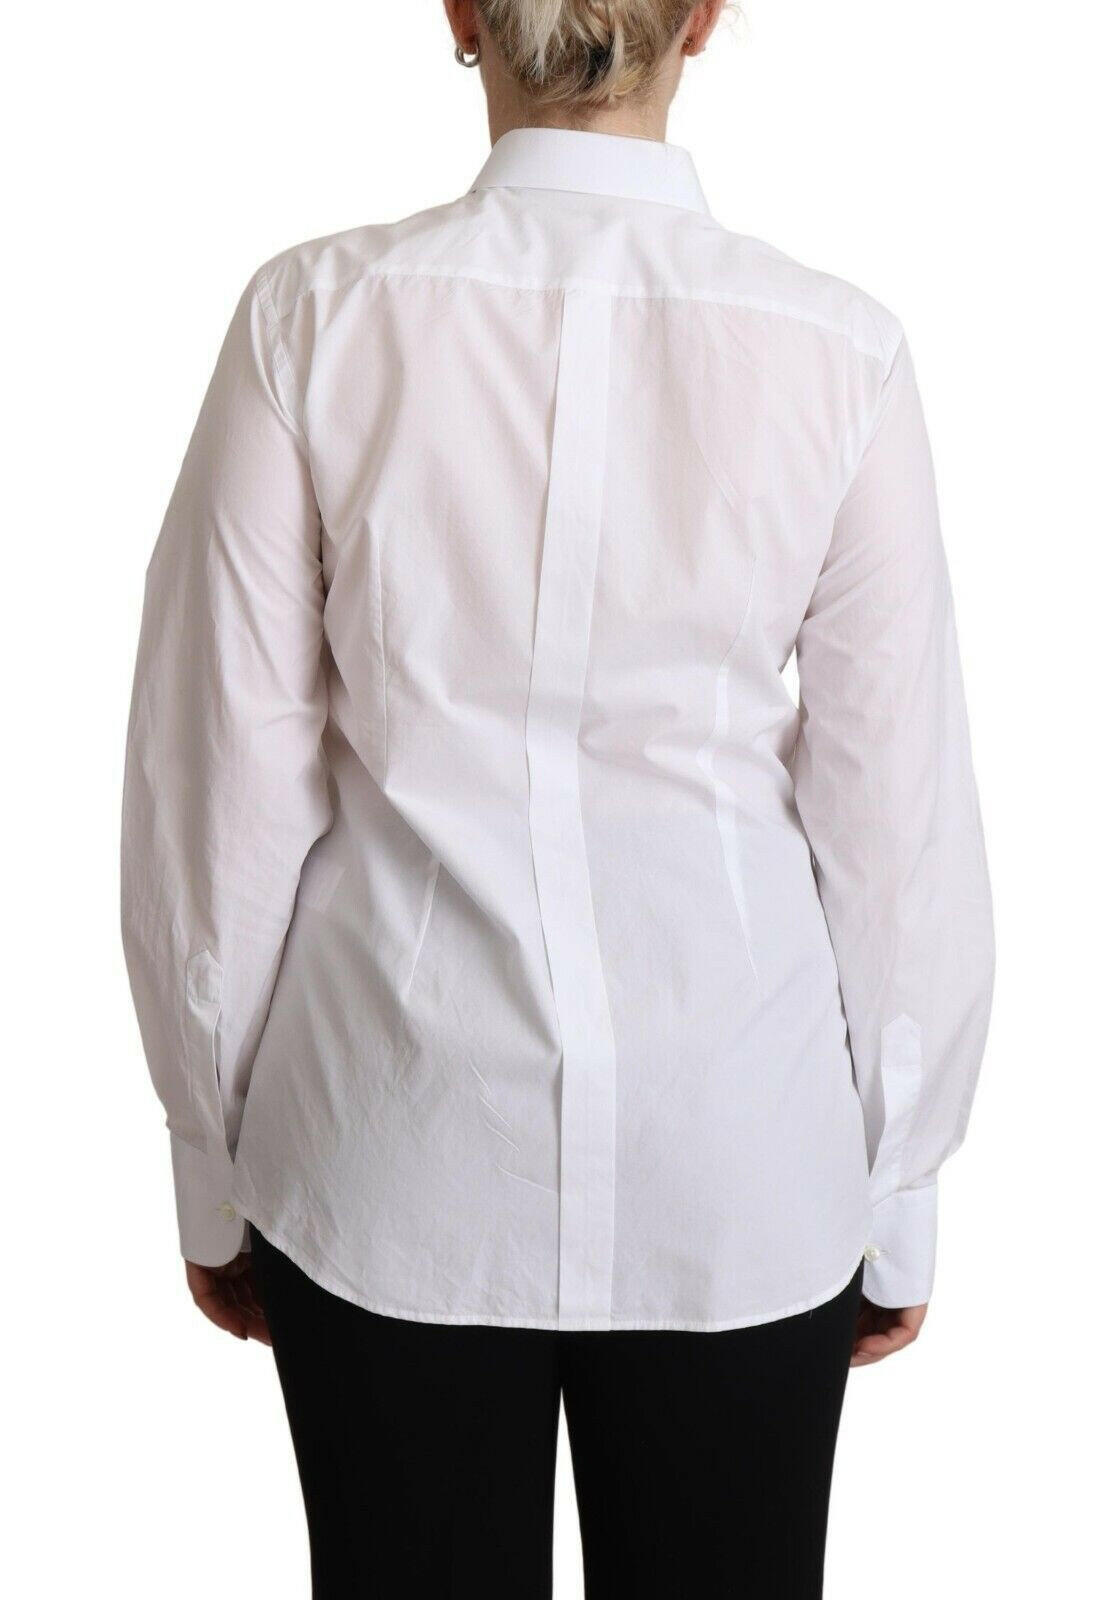 Dolce & Gabbana White Cotton Dress Collared Long Sleeves Shirt Top - GENUINE AUTHENTIC BRAND LLC  